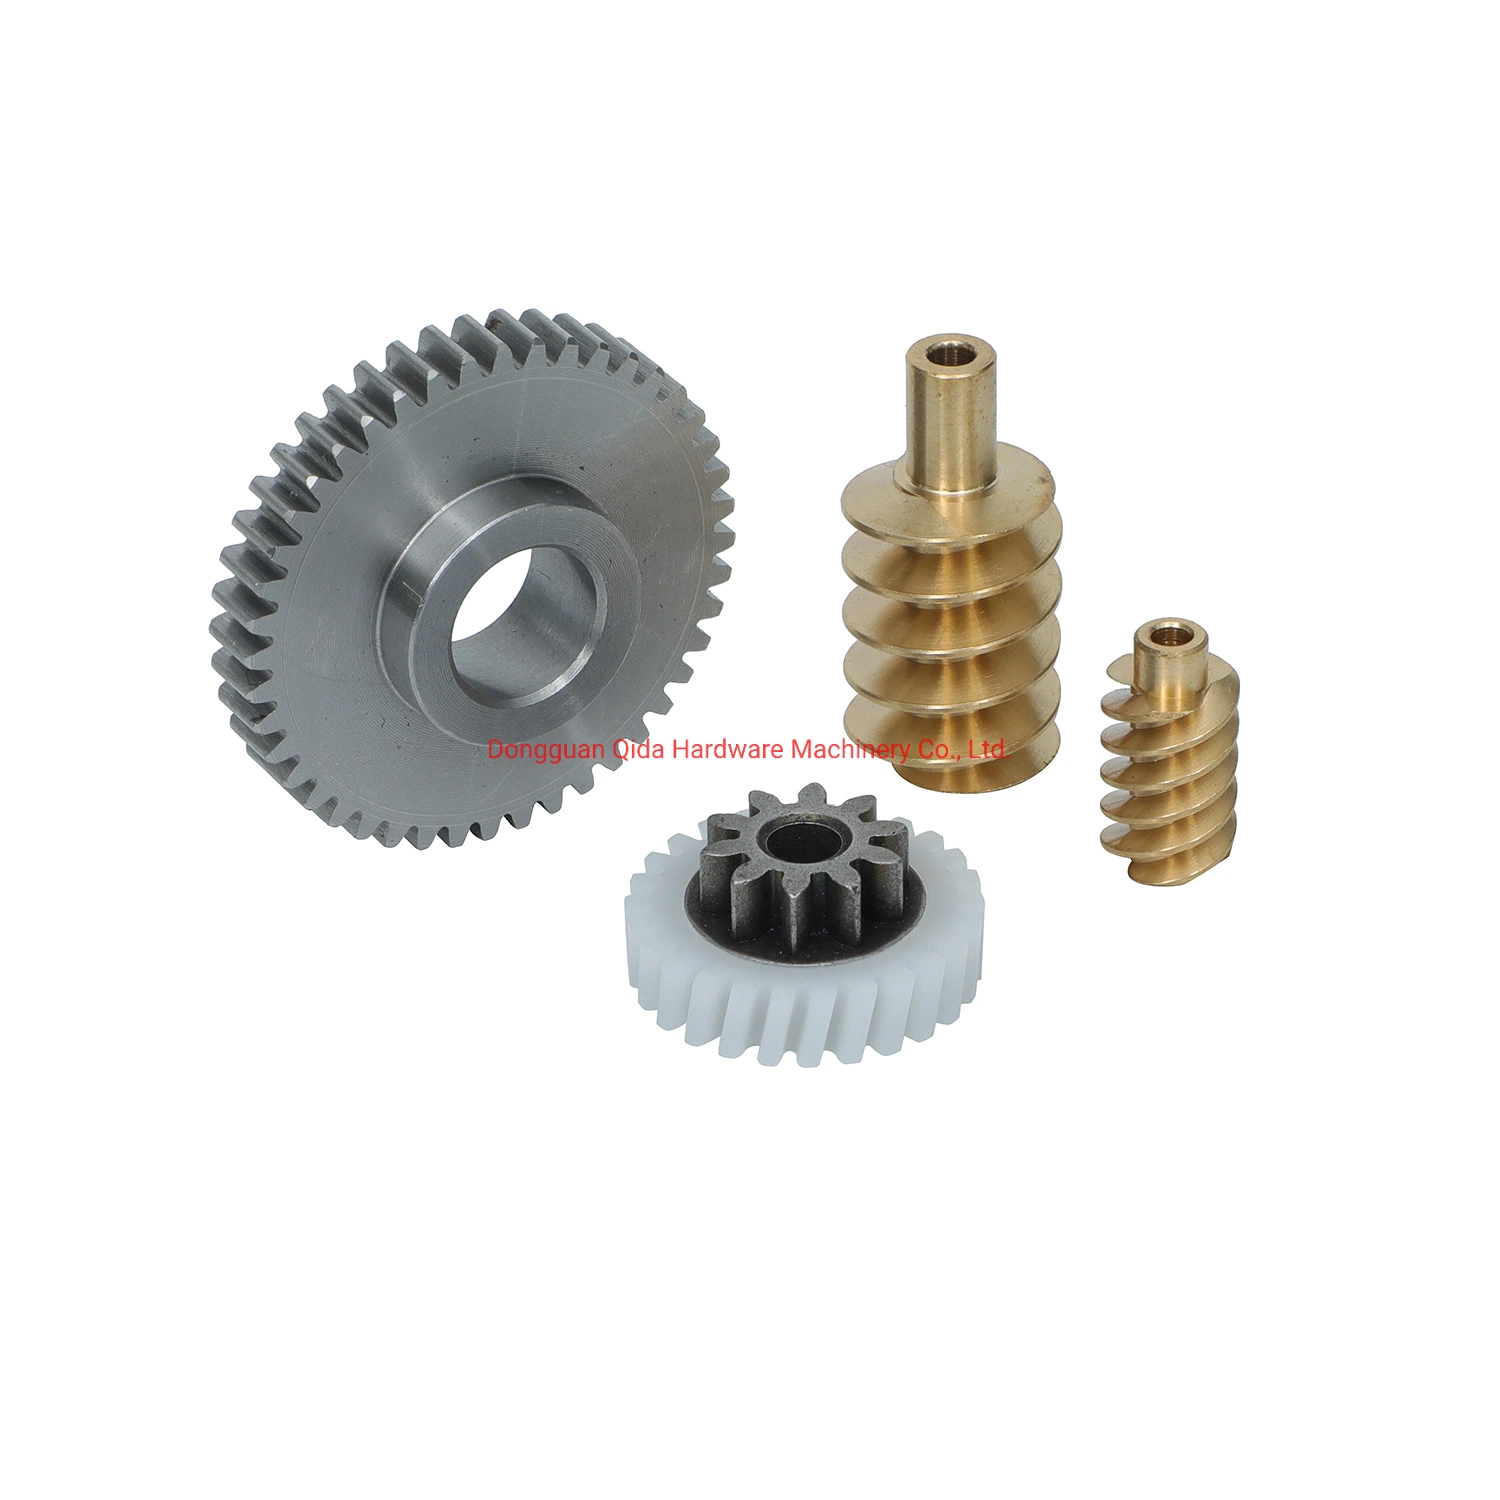 Precision Anti-Backlash Stainless Steel Worm Gear and Bronze Worms